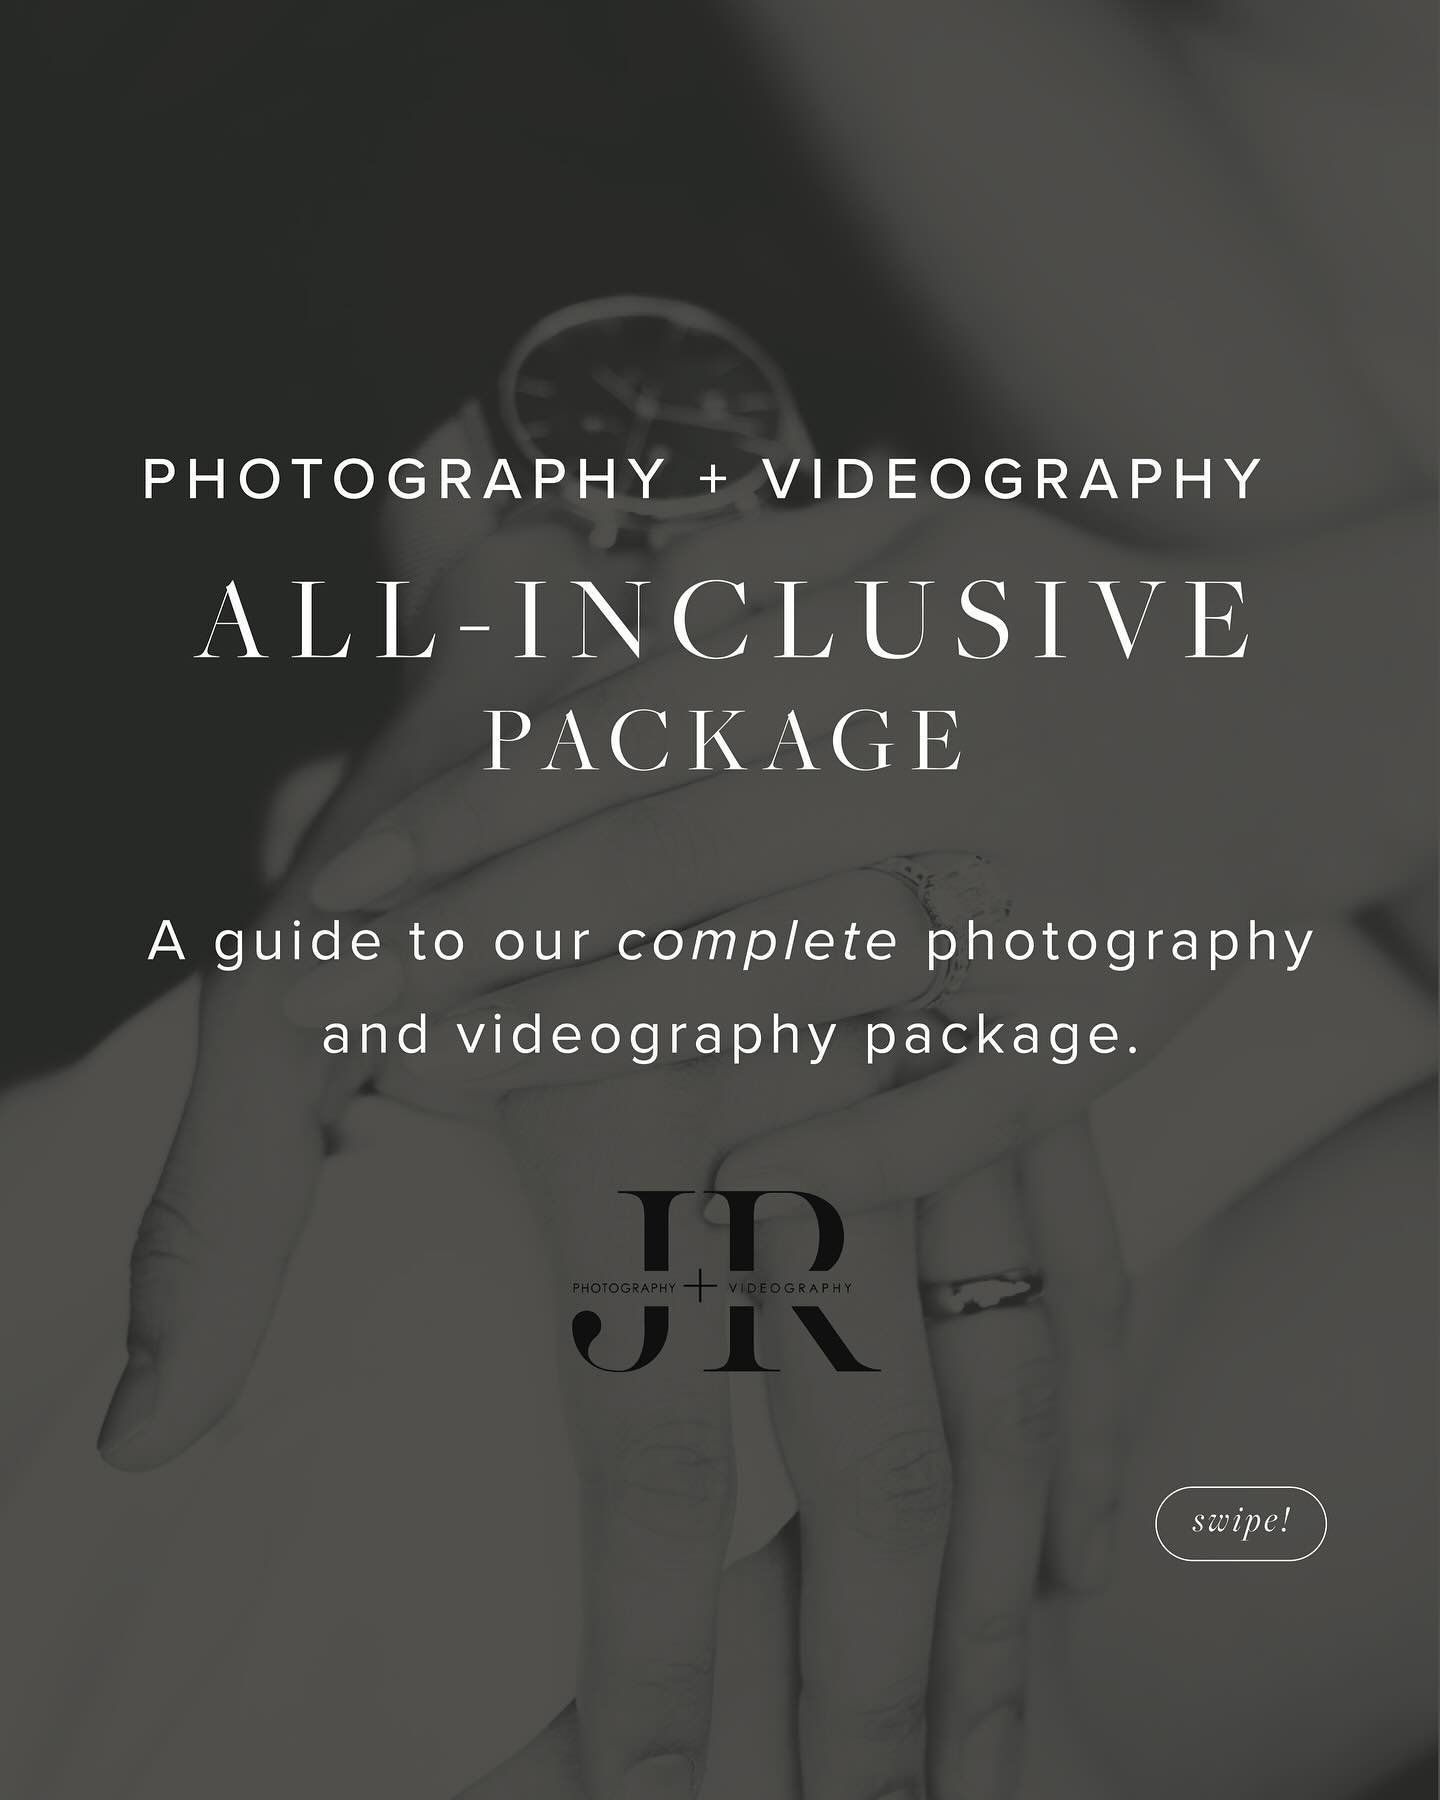 At JR Captures, we offer our signature package called the &lsquo;All-Inclusive&rsquo; package, allowing us to capture the entirety of your day through both photo and video. With this comprehensive package, you receive the combined benefits of photogr